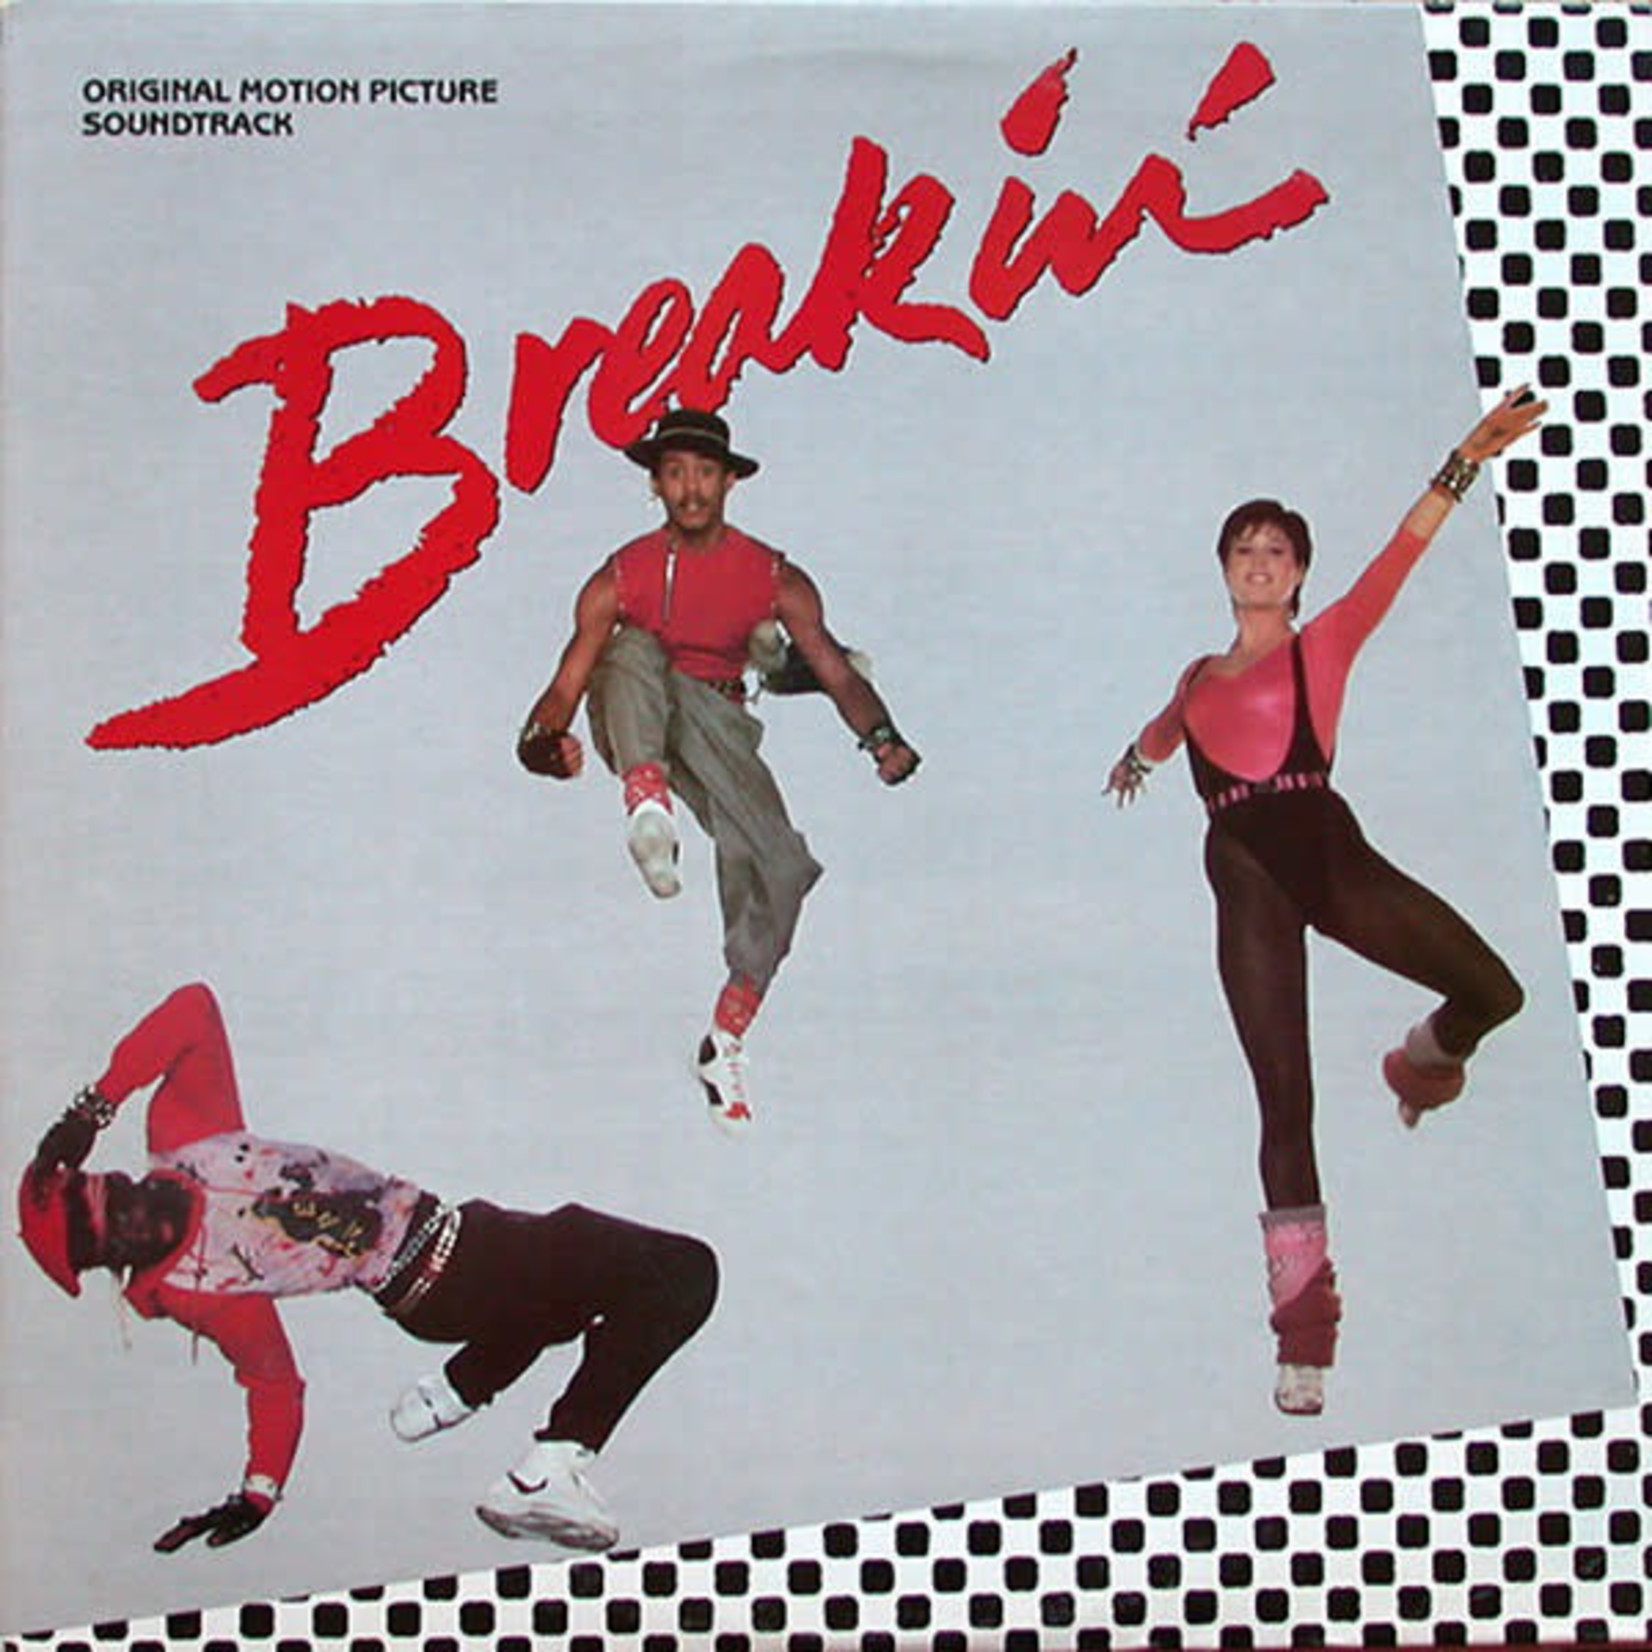 Various – Breakin' Original Motion Picture Soundtrack (VG, 1984, LP, Polydor – PDS-1-6394, Canada)